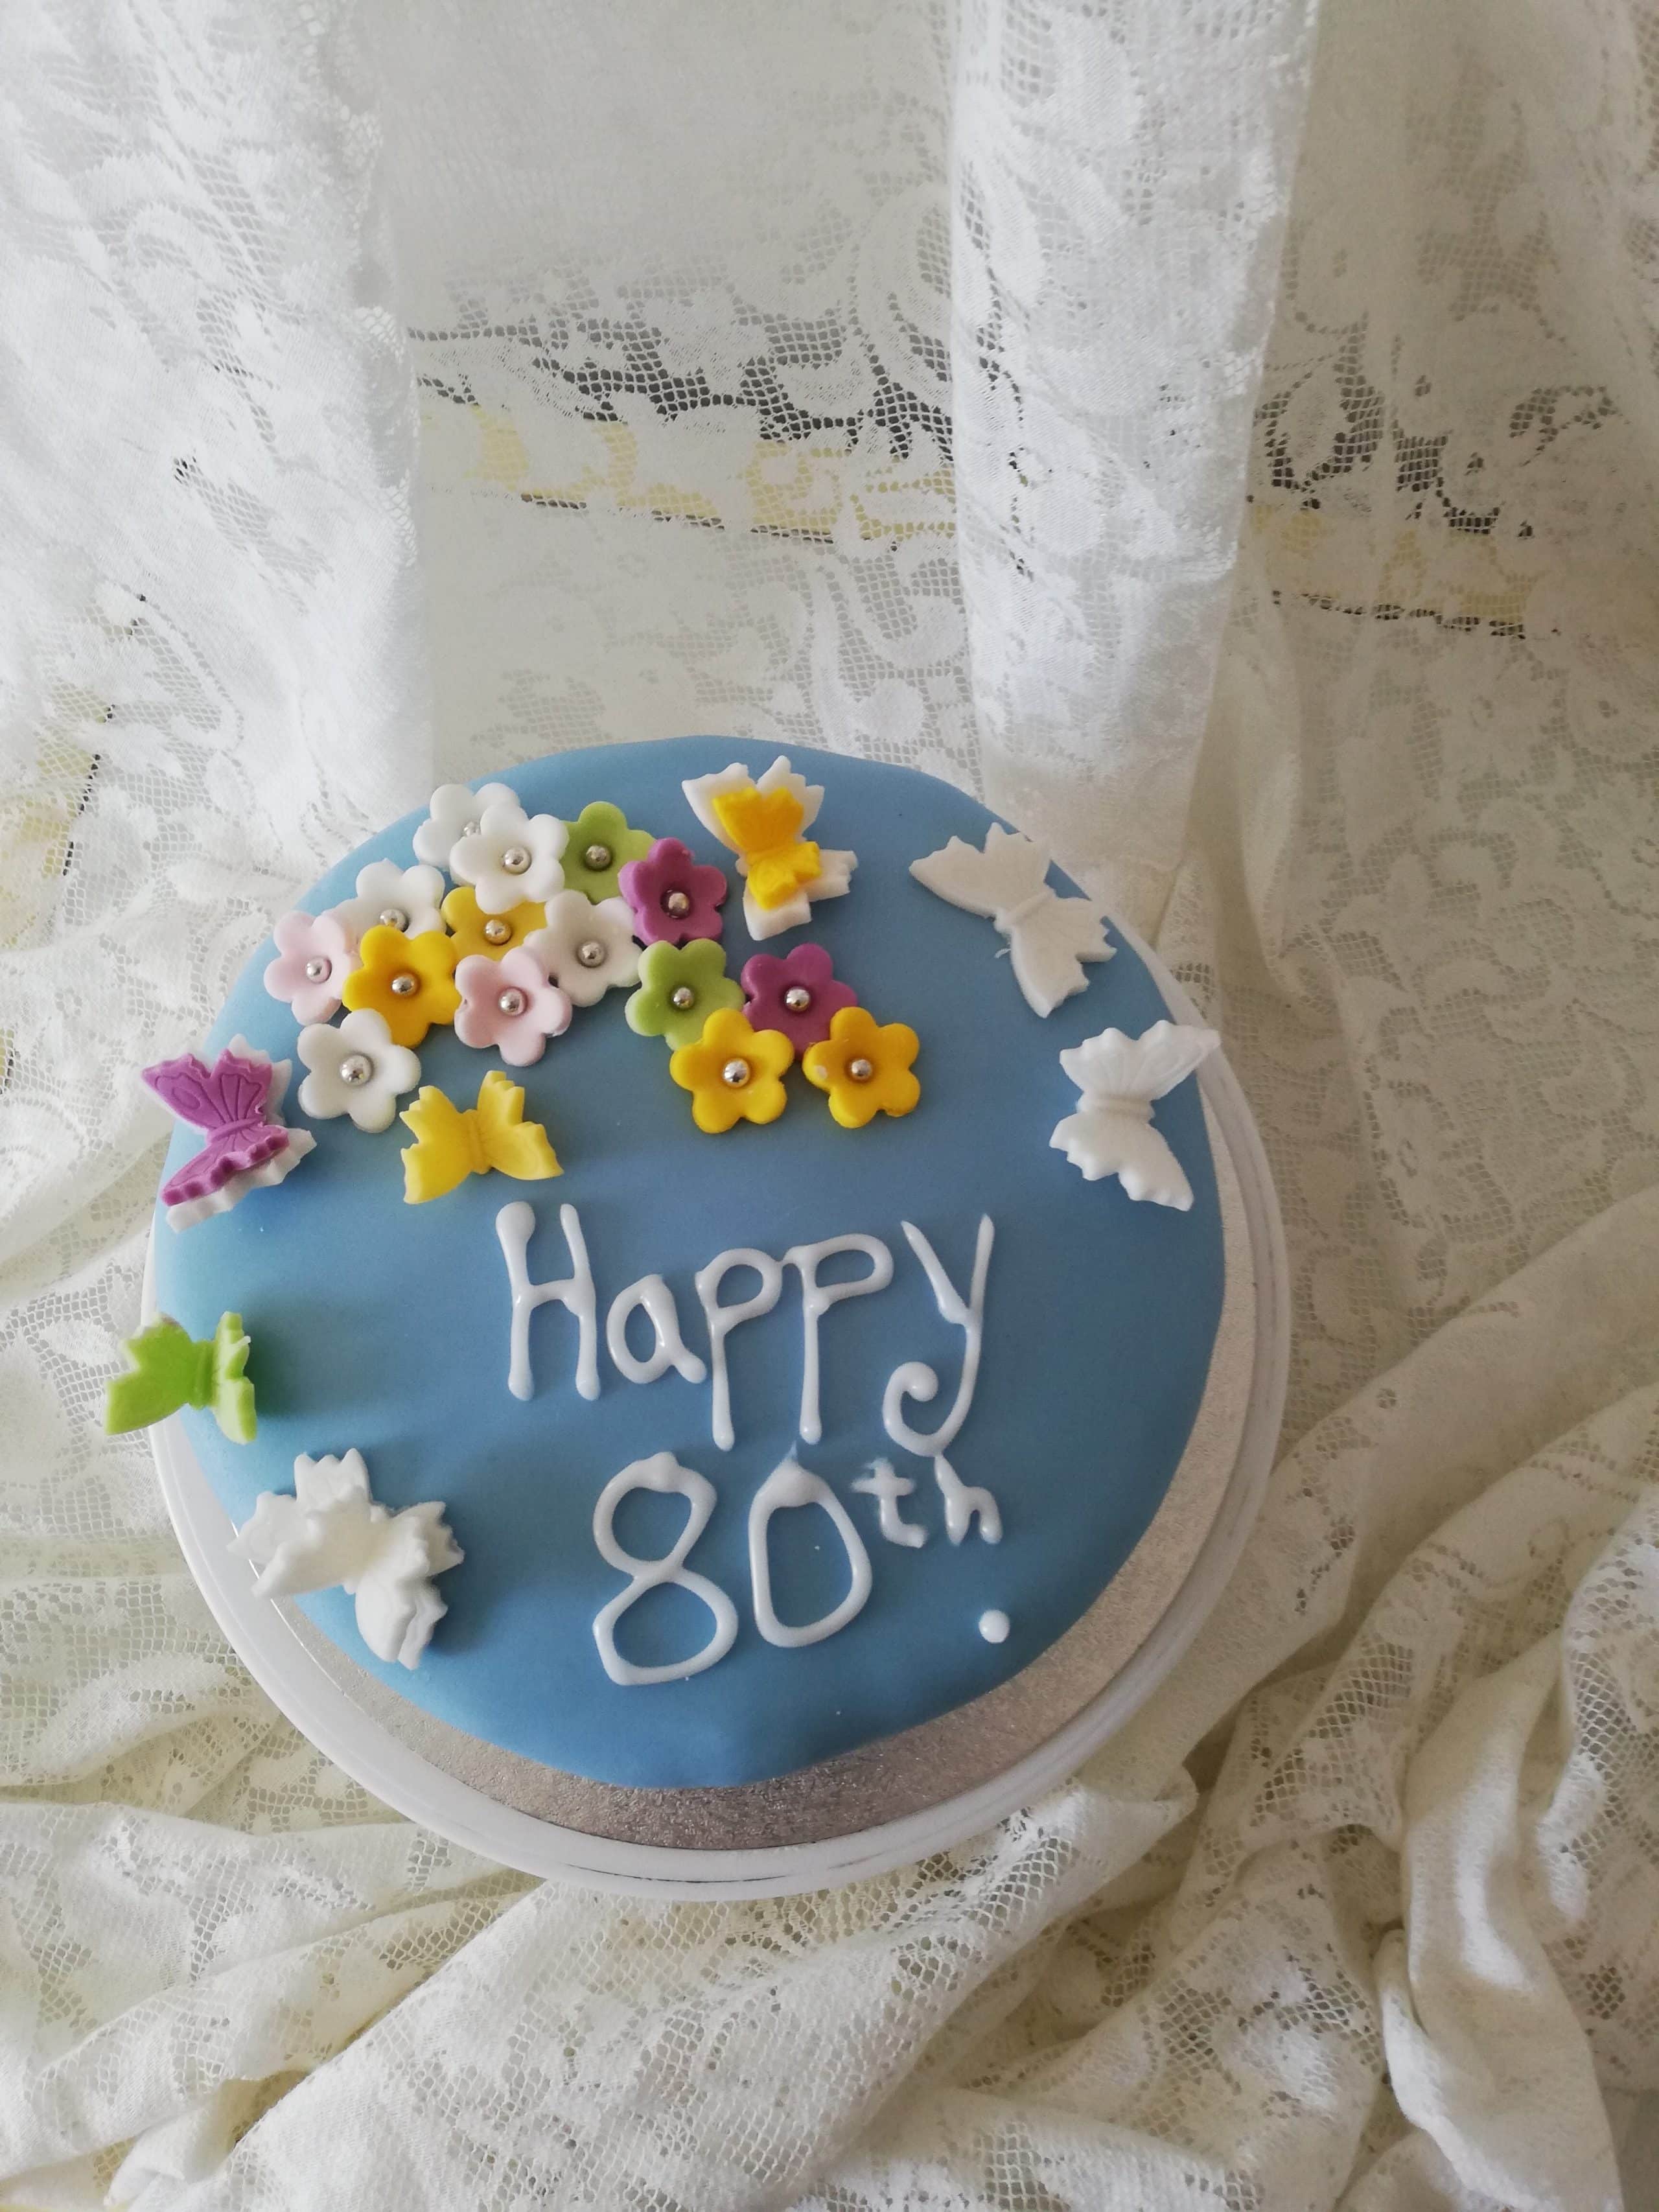 80th Birthday cake in numbers - Sensational Cakes